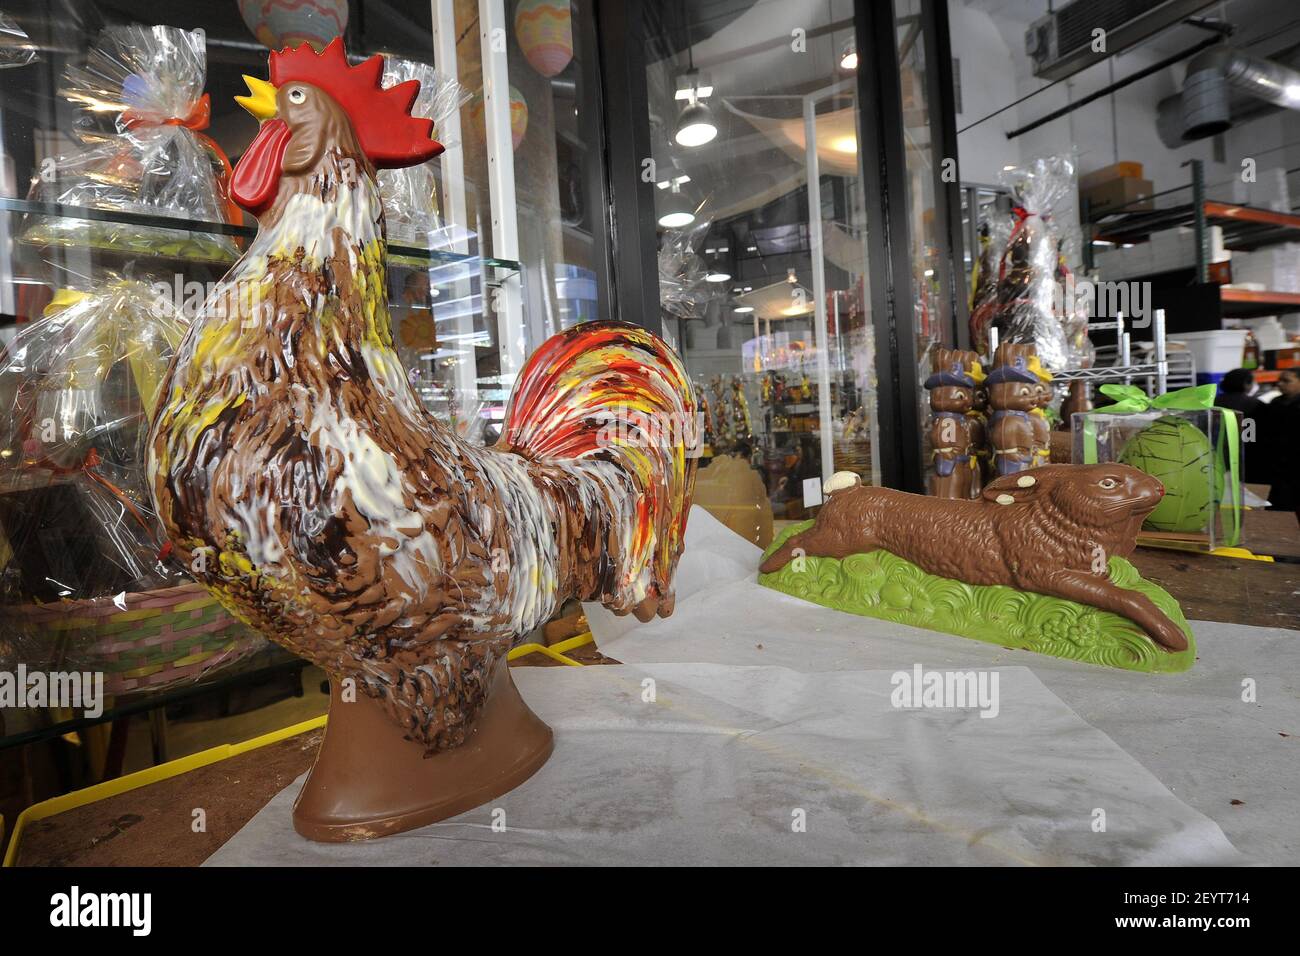 06 April 2012 - New York - A chocolate rooster (L) and 'running' rabbit (R) cool on shelves before being wrapped and put out on display at Jacques Torres Chocolates' Hudson Street retail store in anticipation of Easter Holiday weekend, April 6, 2012, New York, NY. Photo Credit: Anthony Behar/Sipa Press Stock Photo